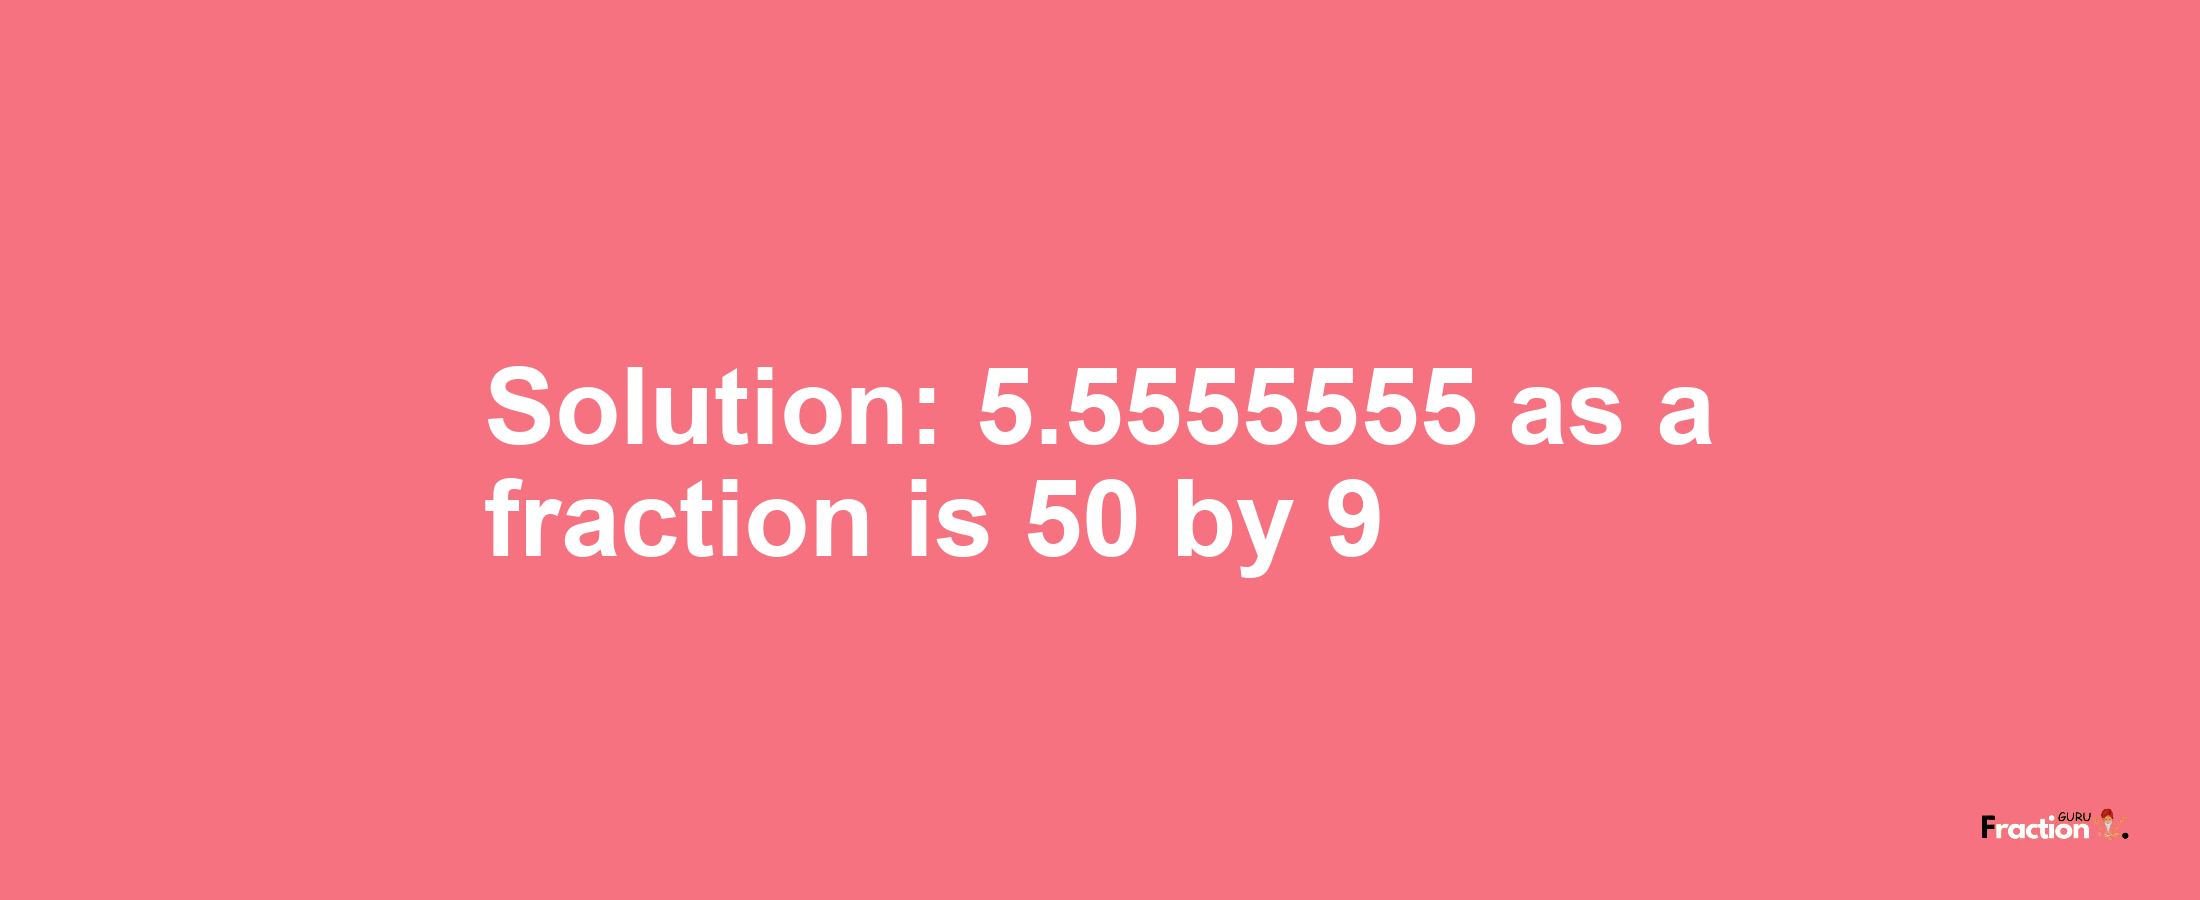 Solution:5.5555555 as a fraction is 50/9